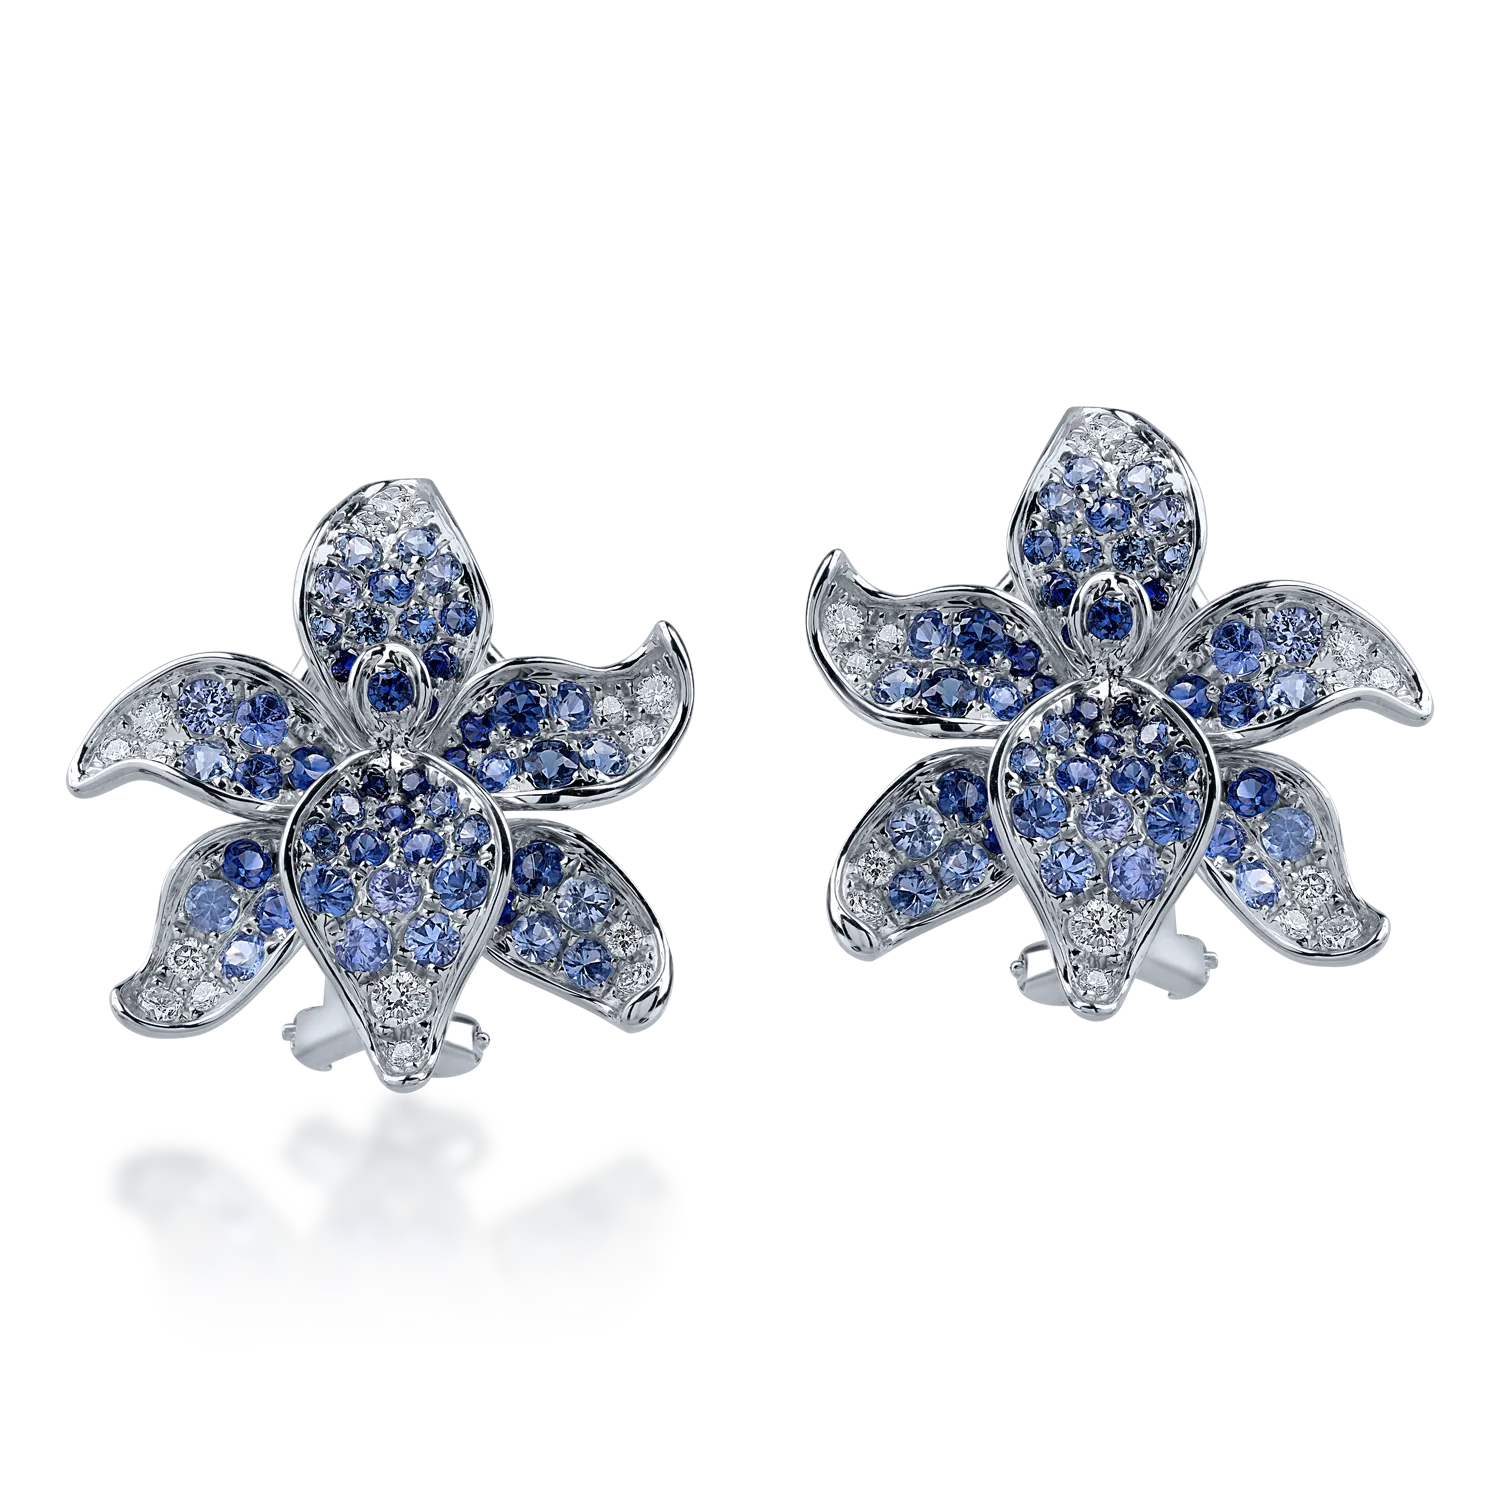 White gold flower earrings with 1.8ct blue sapphires and 0.32ct diamonds